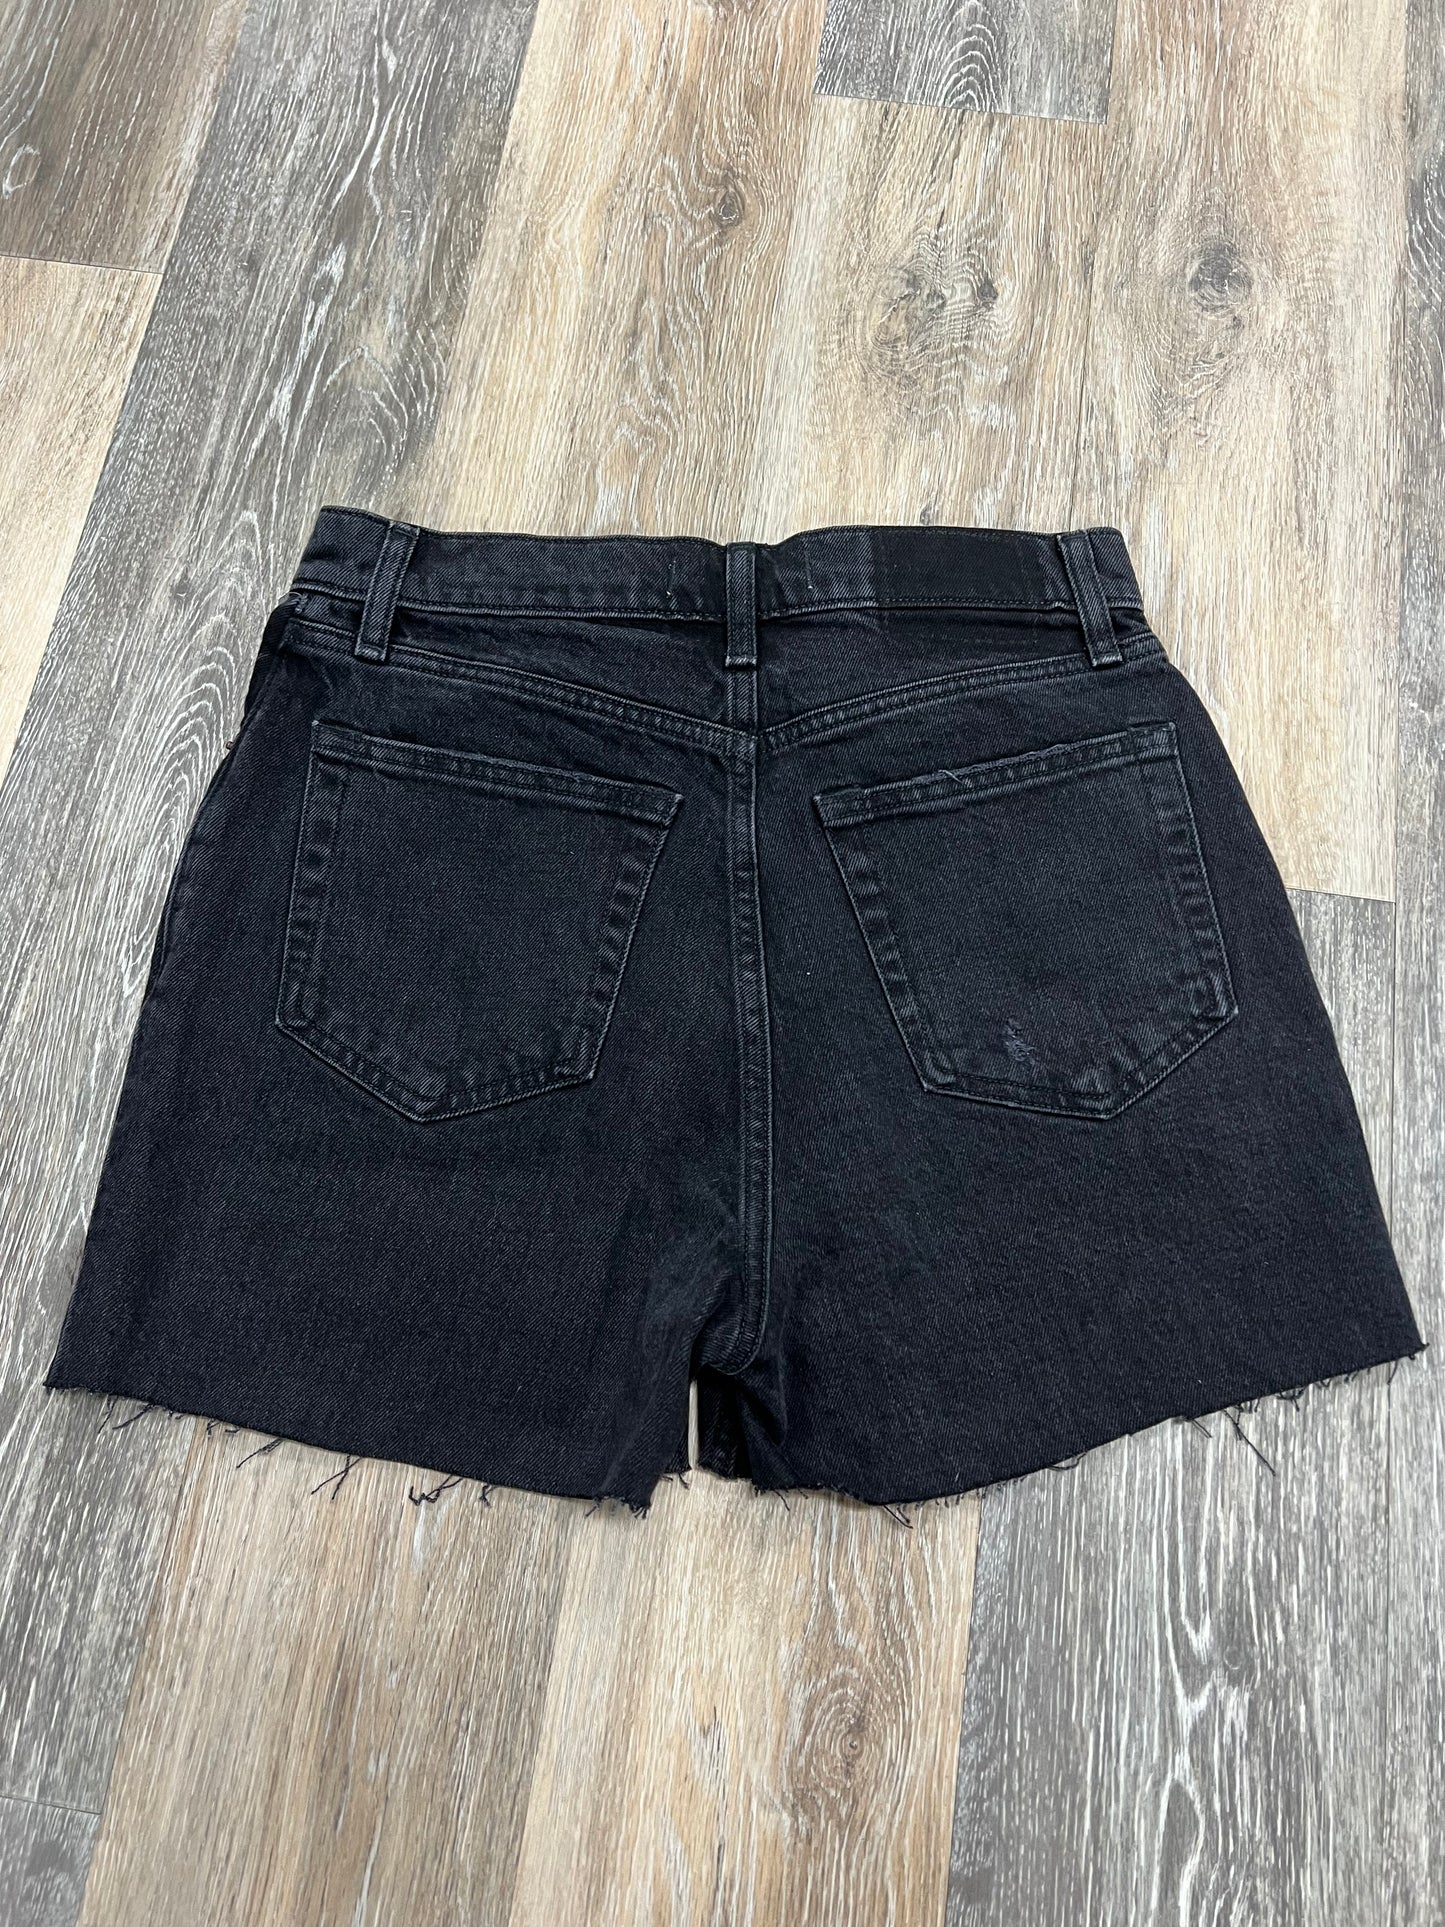 Shorts By Abercrombie And Fitch  Size: 8/29 L